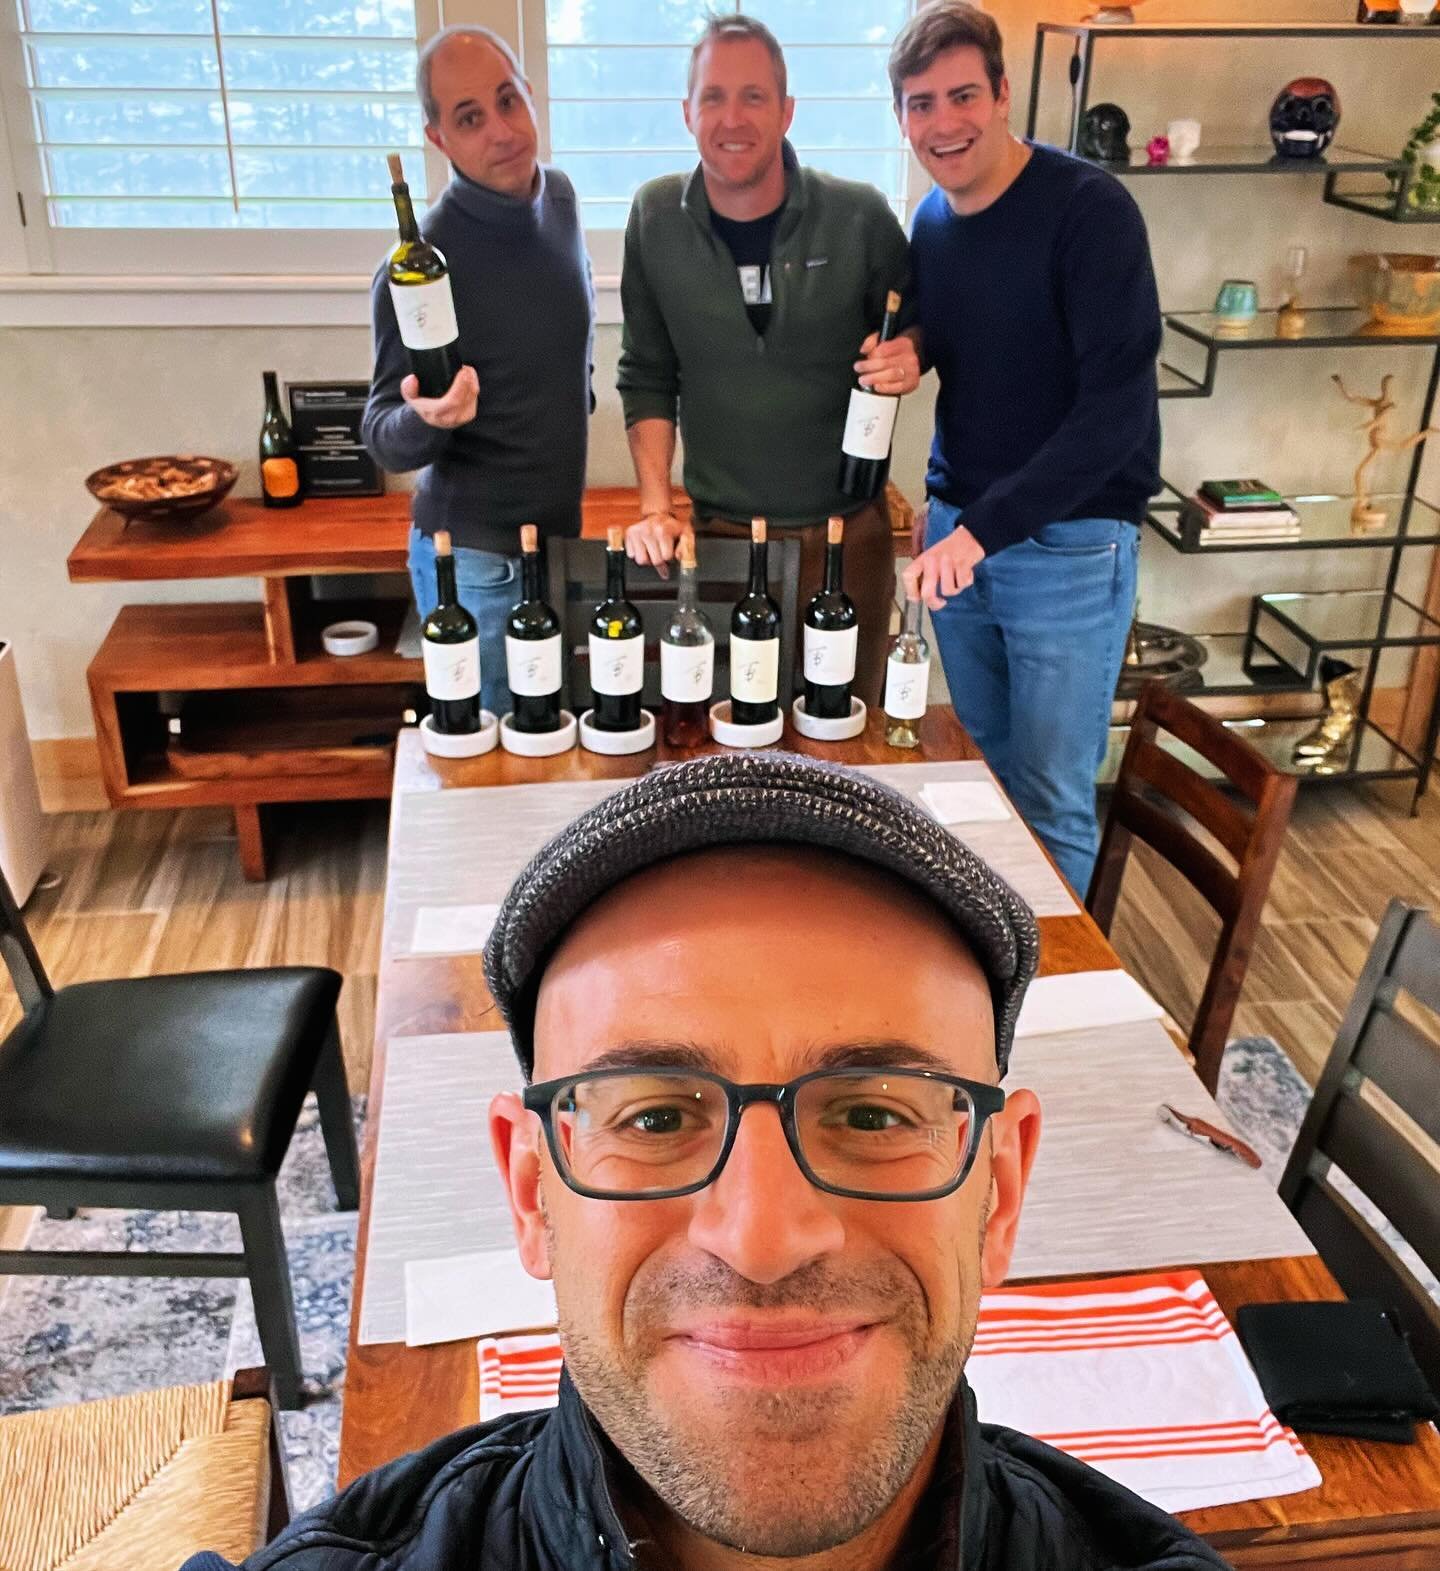 One Siciliano and two Piemontesi go to Napa (on a rainy day ☔️) 😃🍷

Thank you to @sarah.h.bray @tberkleywines @cathycorison @megs_zobeck for making @gianluca_colombovini first visit to CA top wine area such a memorable one, even on a stormy day!Gra